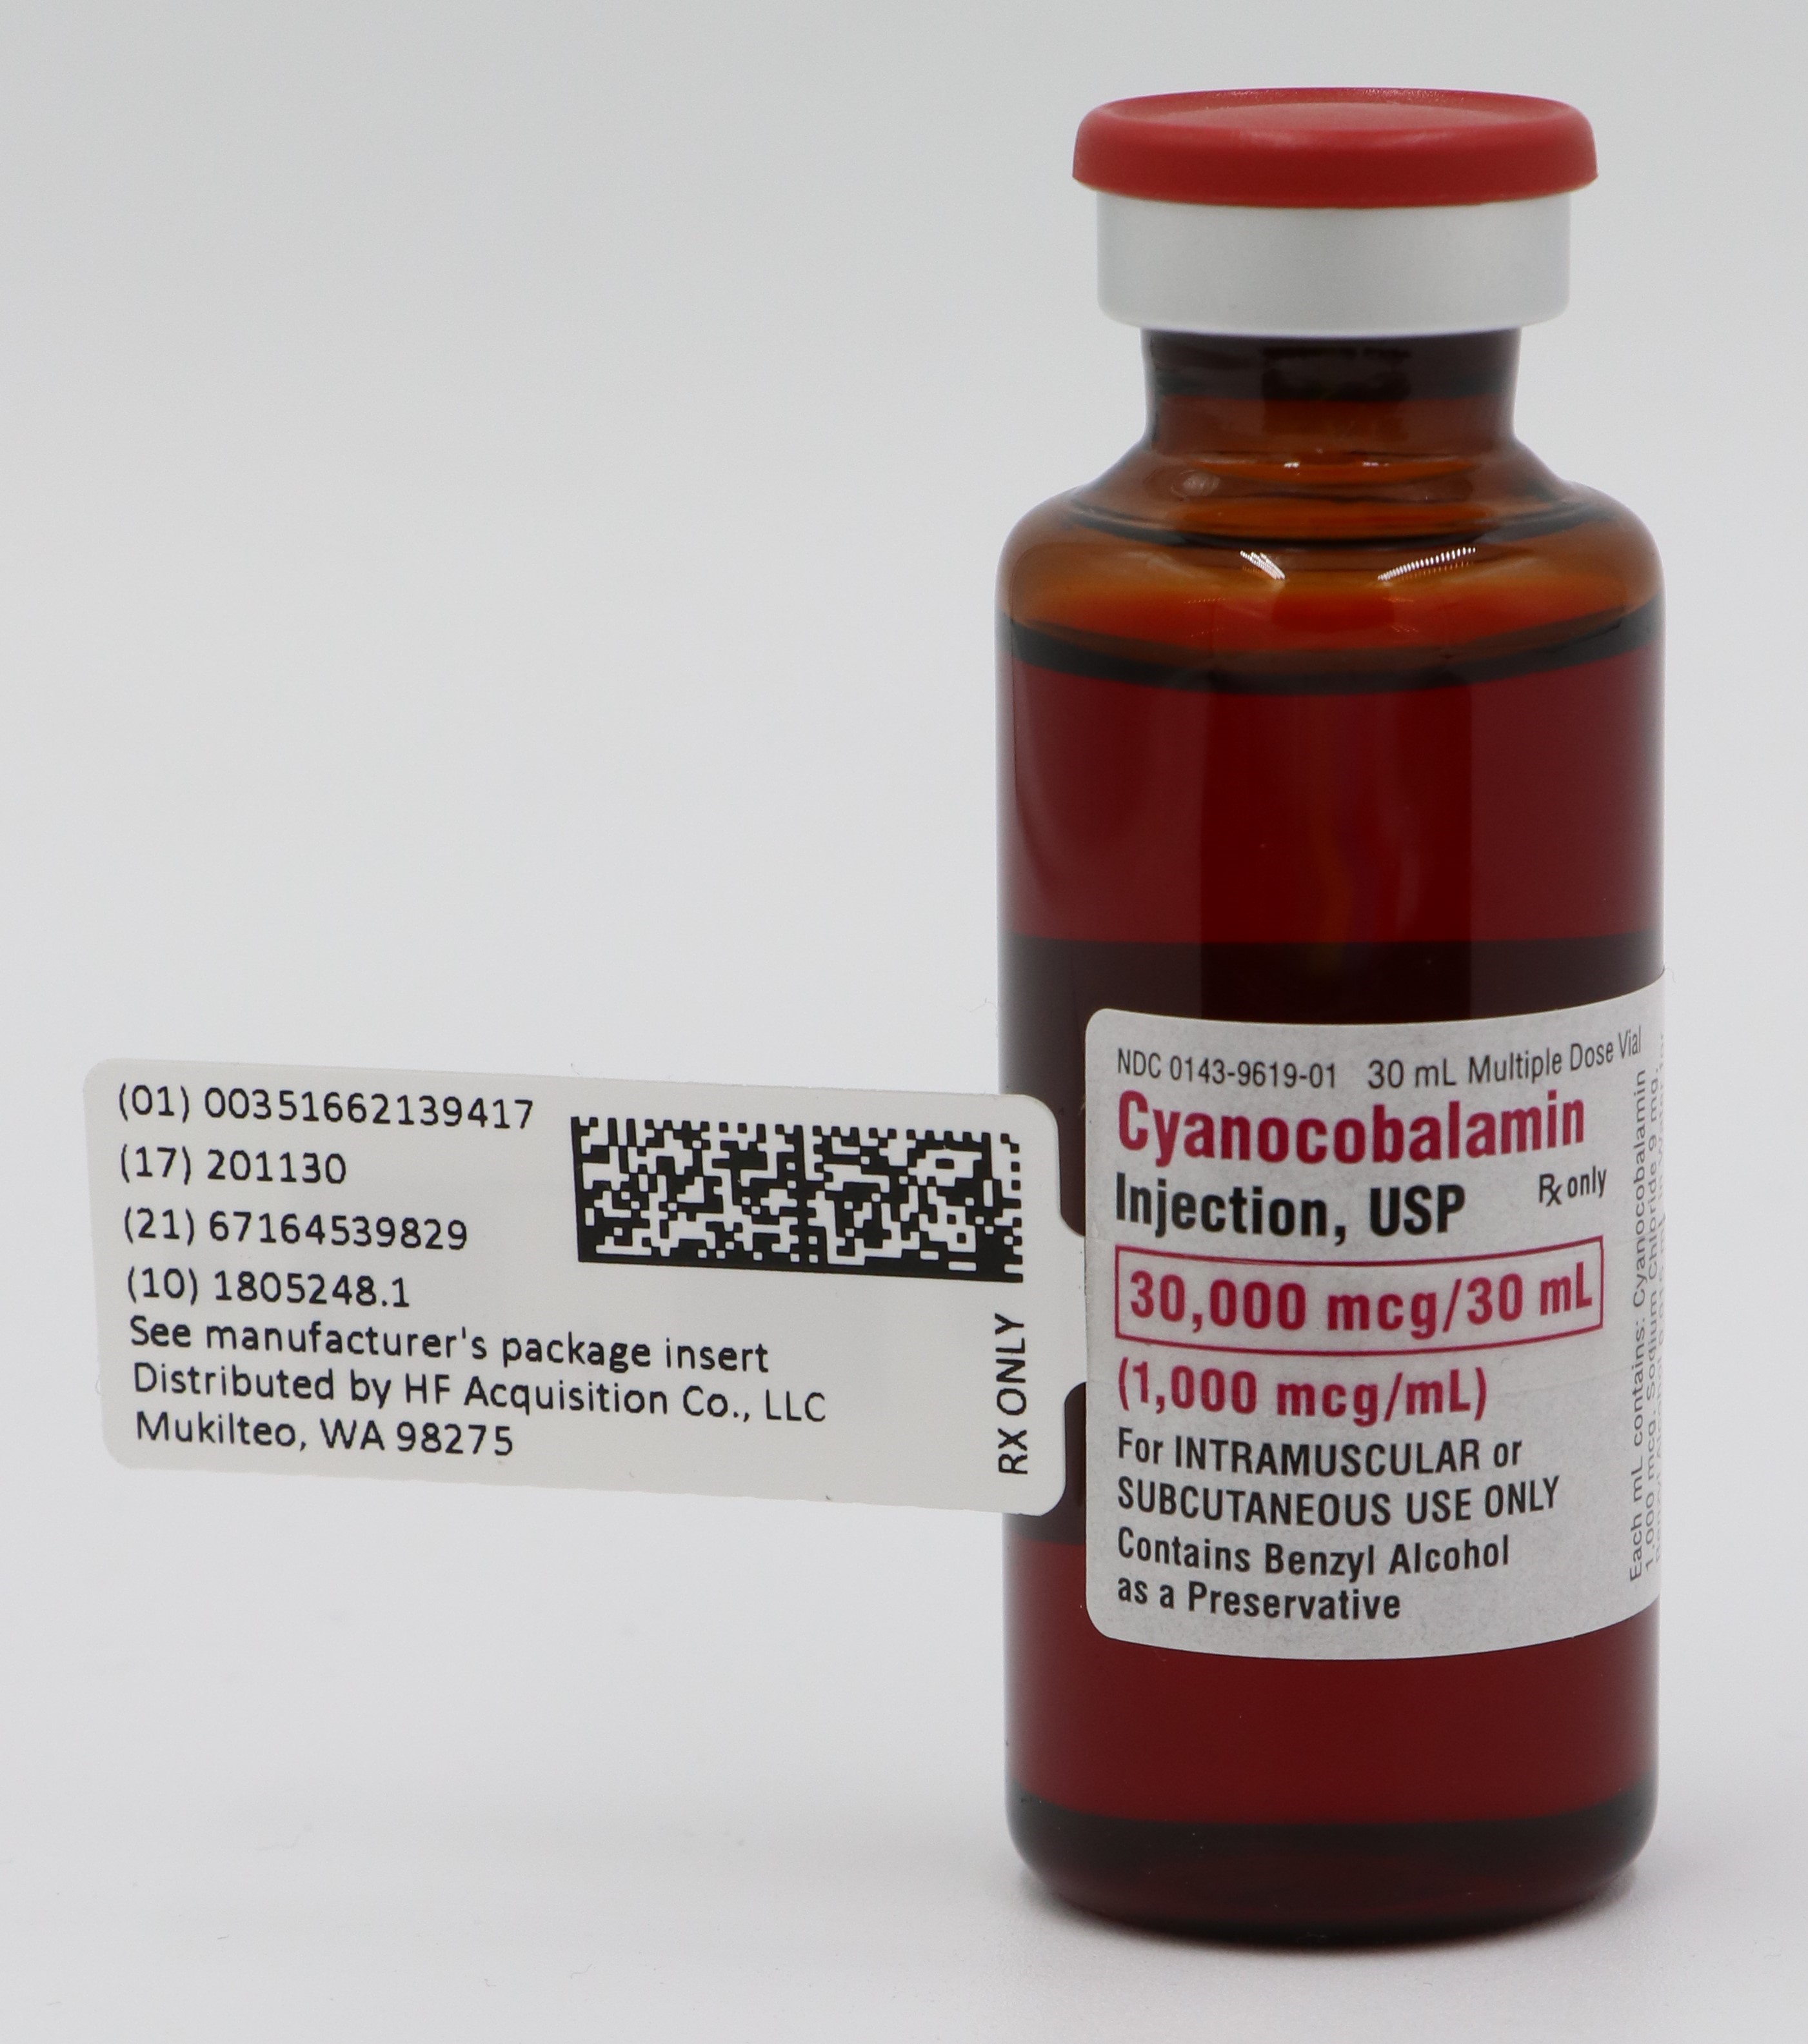 SERIALIZED LABELING